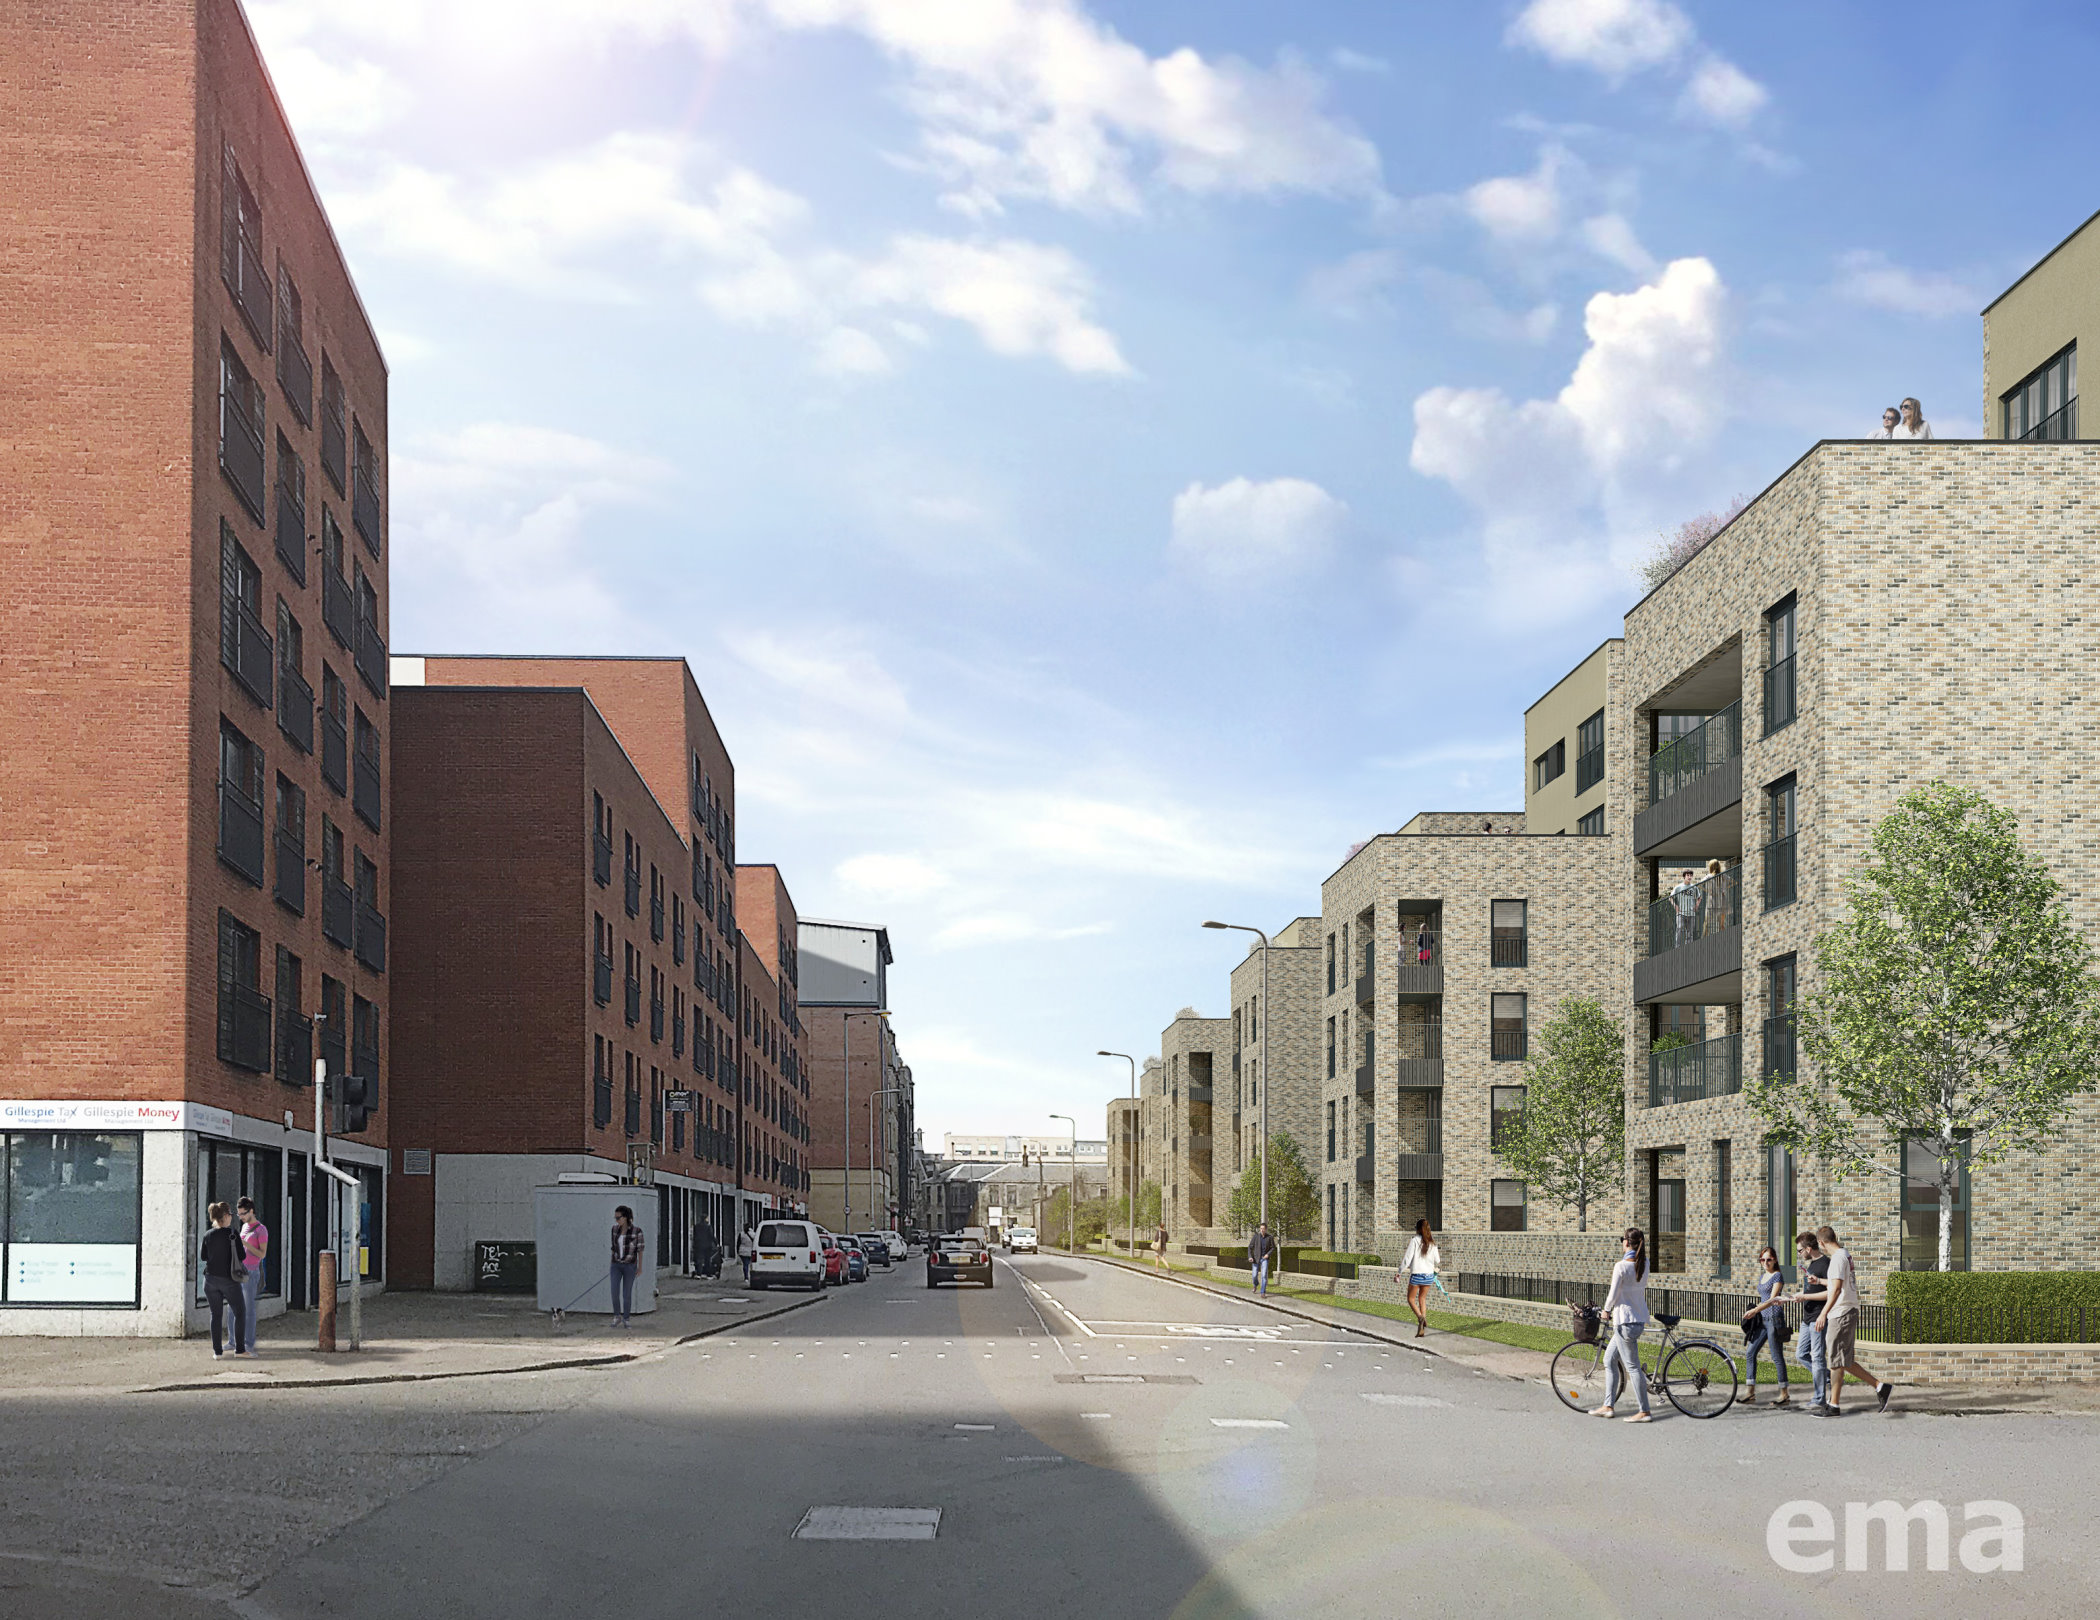 Barratt Homes to transform disused land in Leith